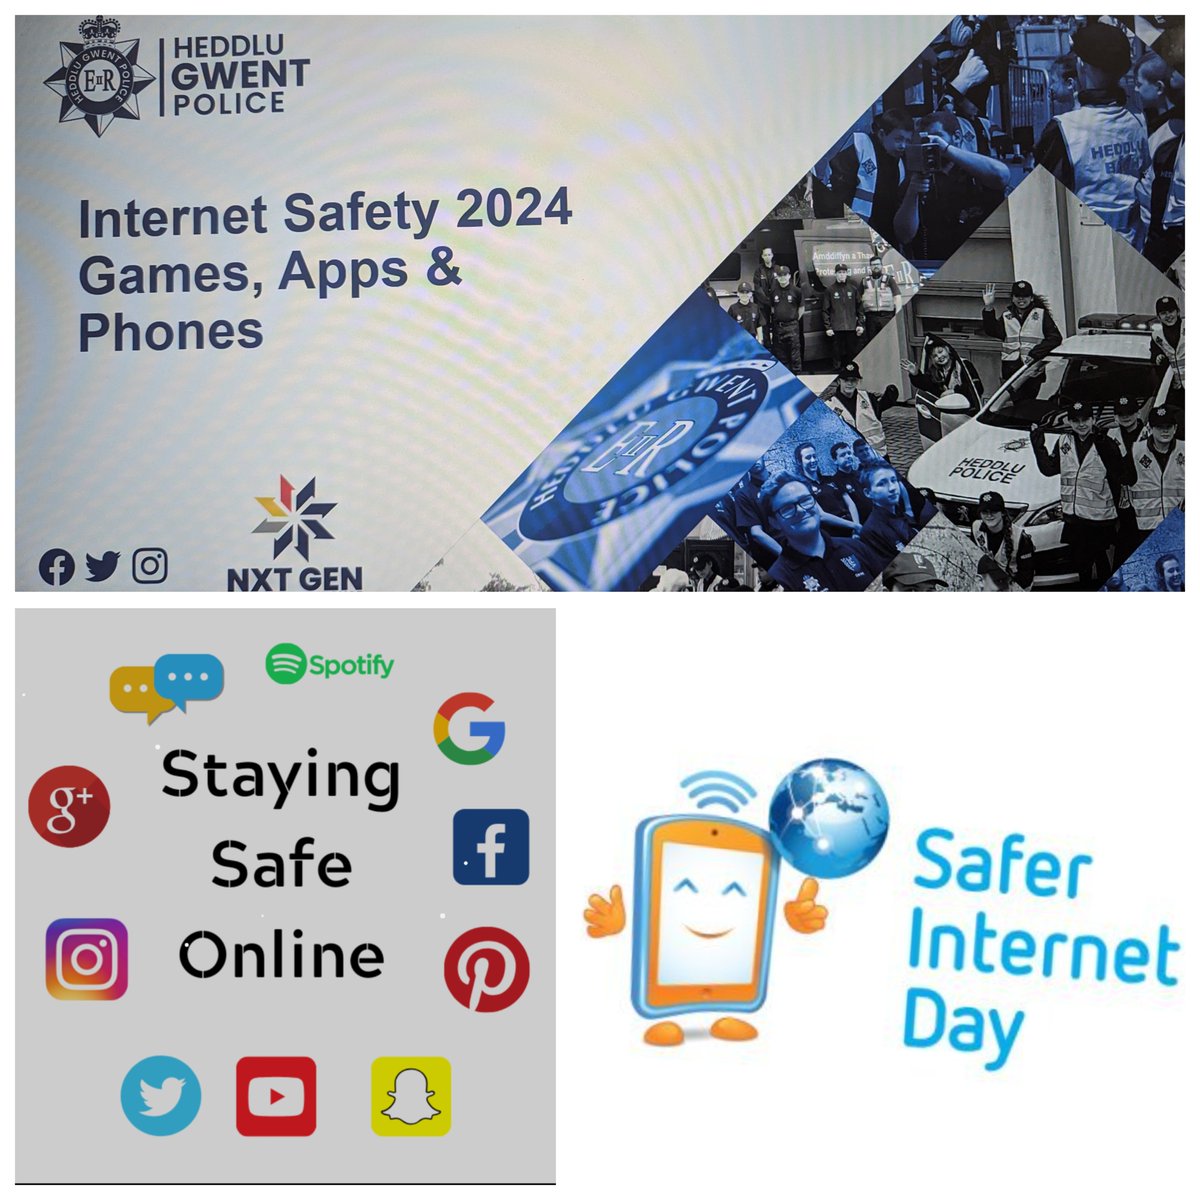 The NxtGen team have been busy delivering @safeinternetday inputs to our #HeddluBach Schools. This has been delivered to over 2,500 pupils so far, with more events planned. #InspiringChange @nationalVPC @GwentPCC @gwentpolice @GPCaerphilly @GPNewport @GPTorfaen #SaferInternetDay